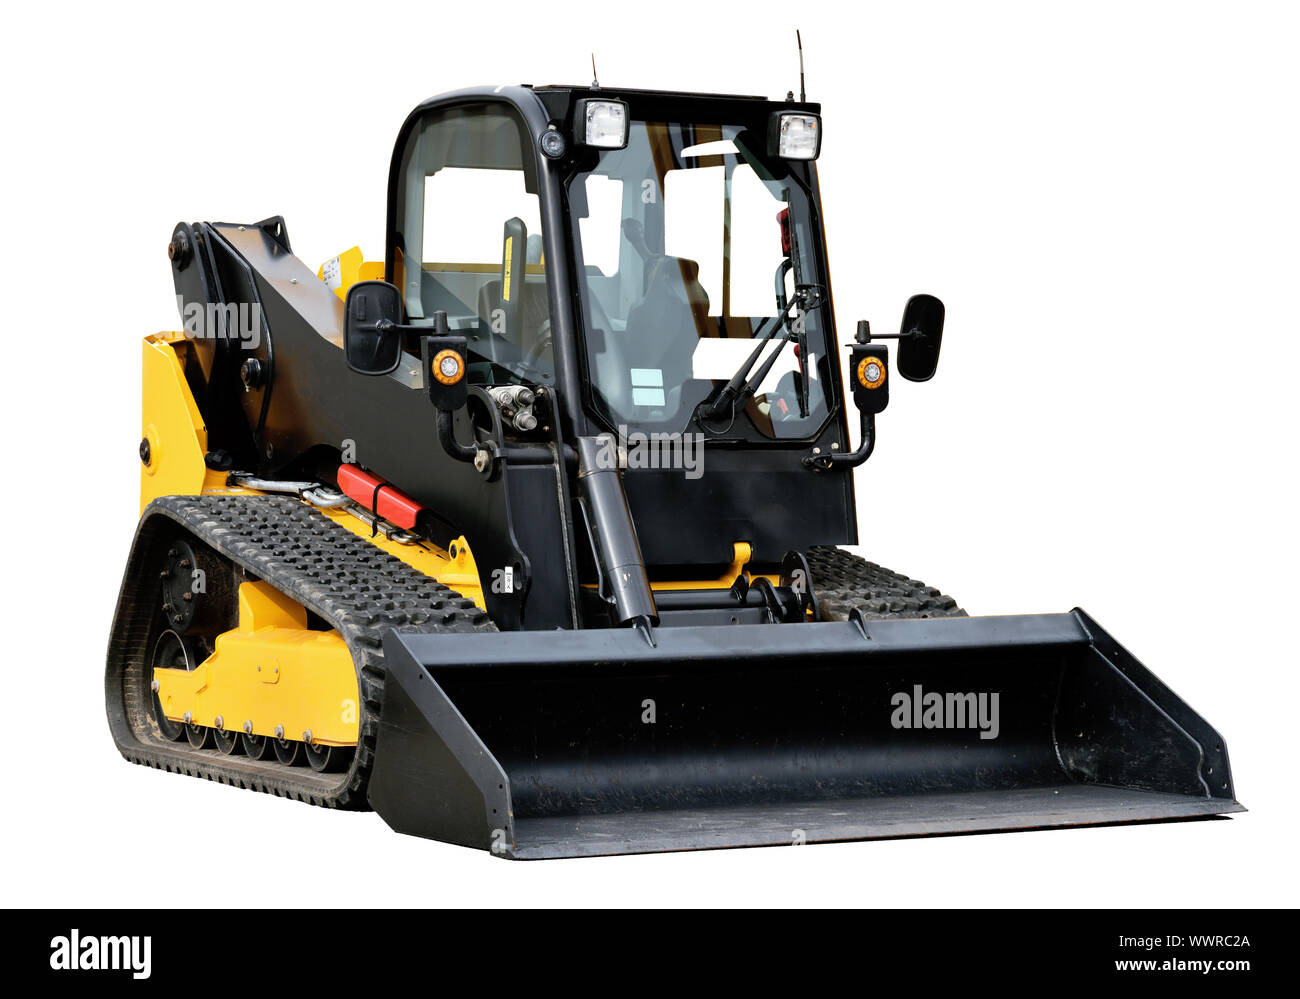 Skid loader or bobcat construction equipment isolated over white background Stock Photo